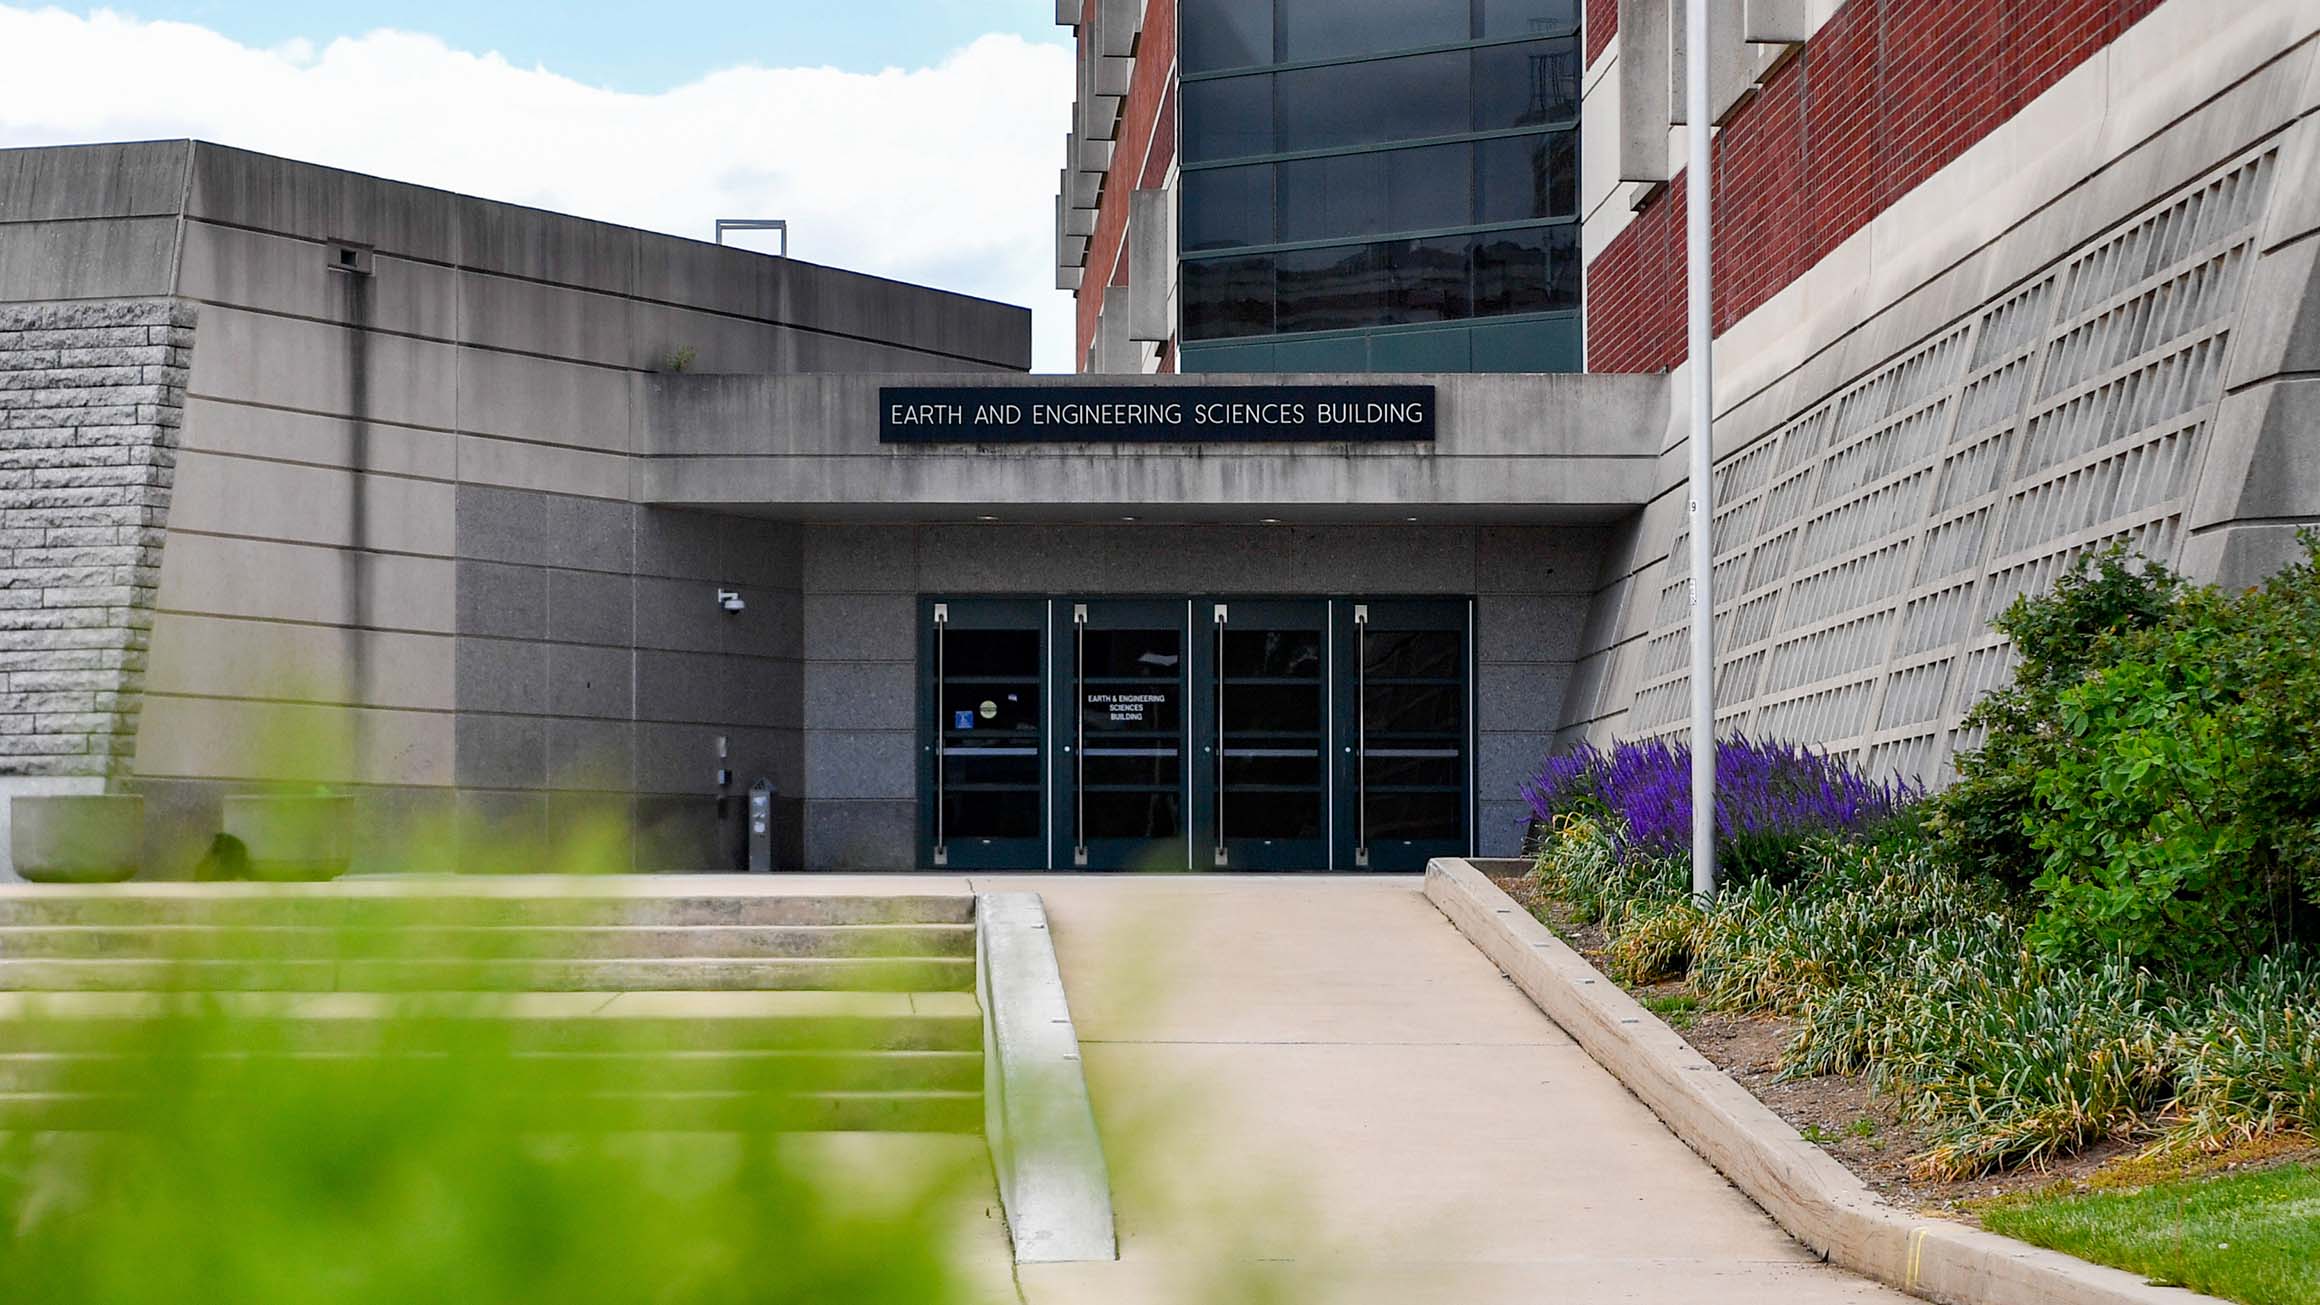 The entrance of the Earth and Engineering Sciences Building